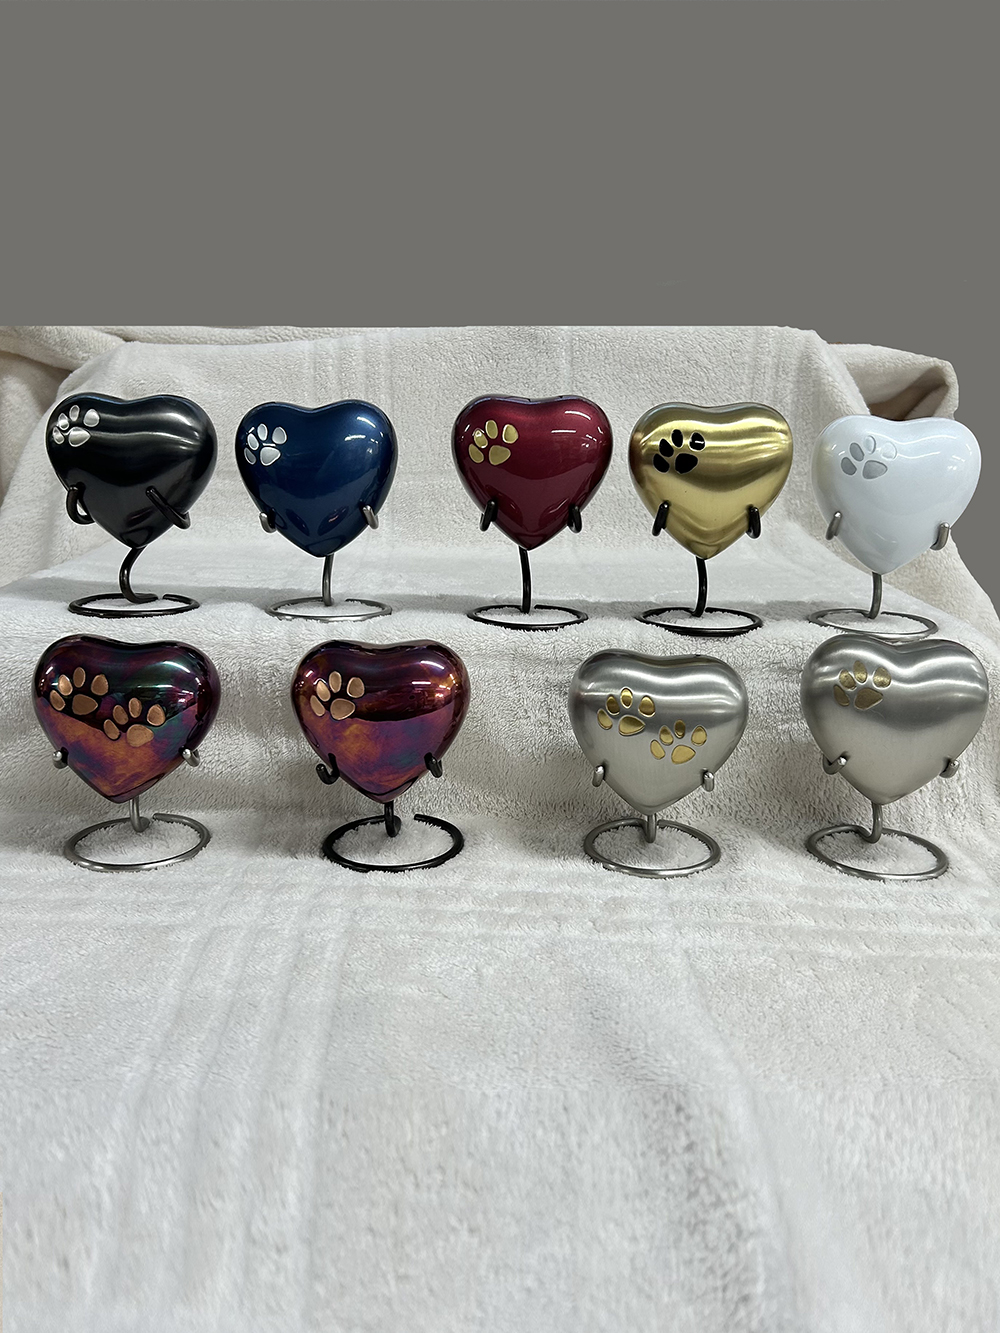 Heart Shaped Urns With PawPrints